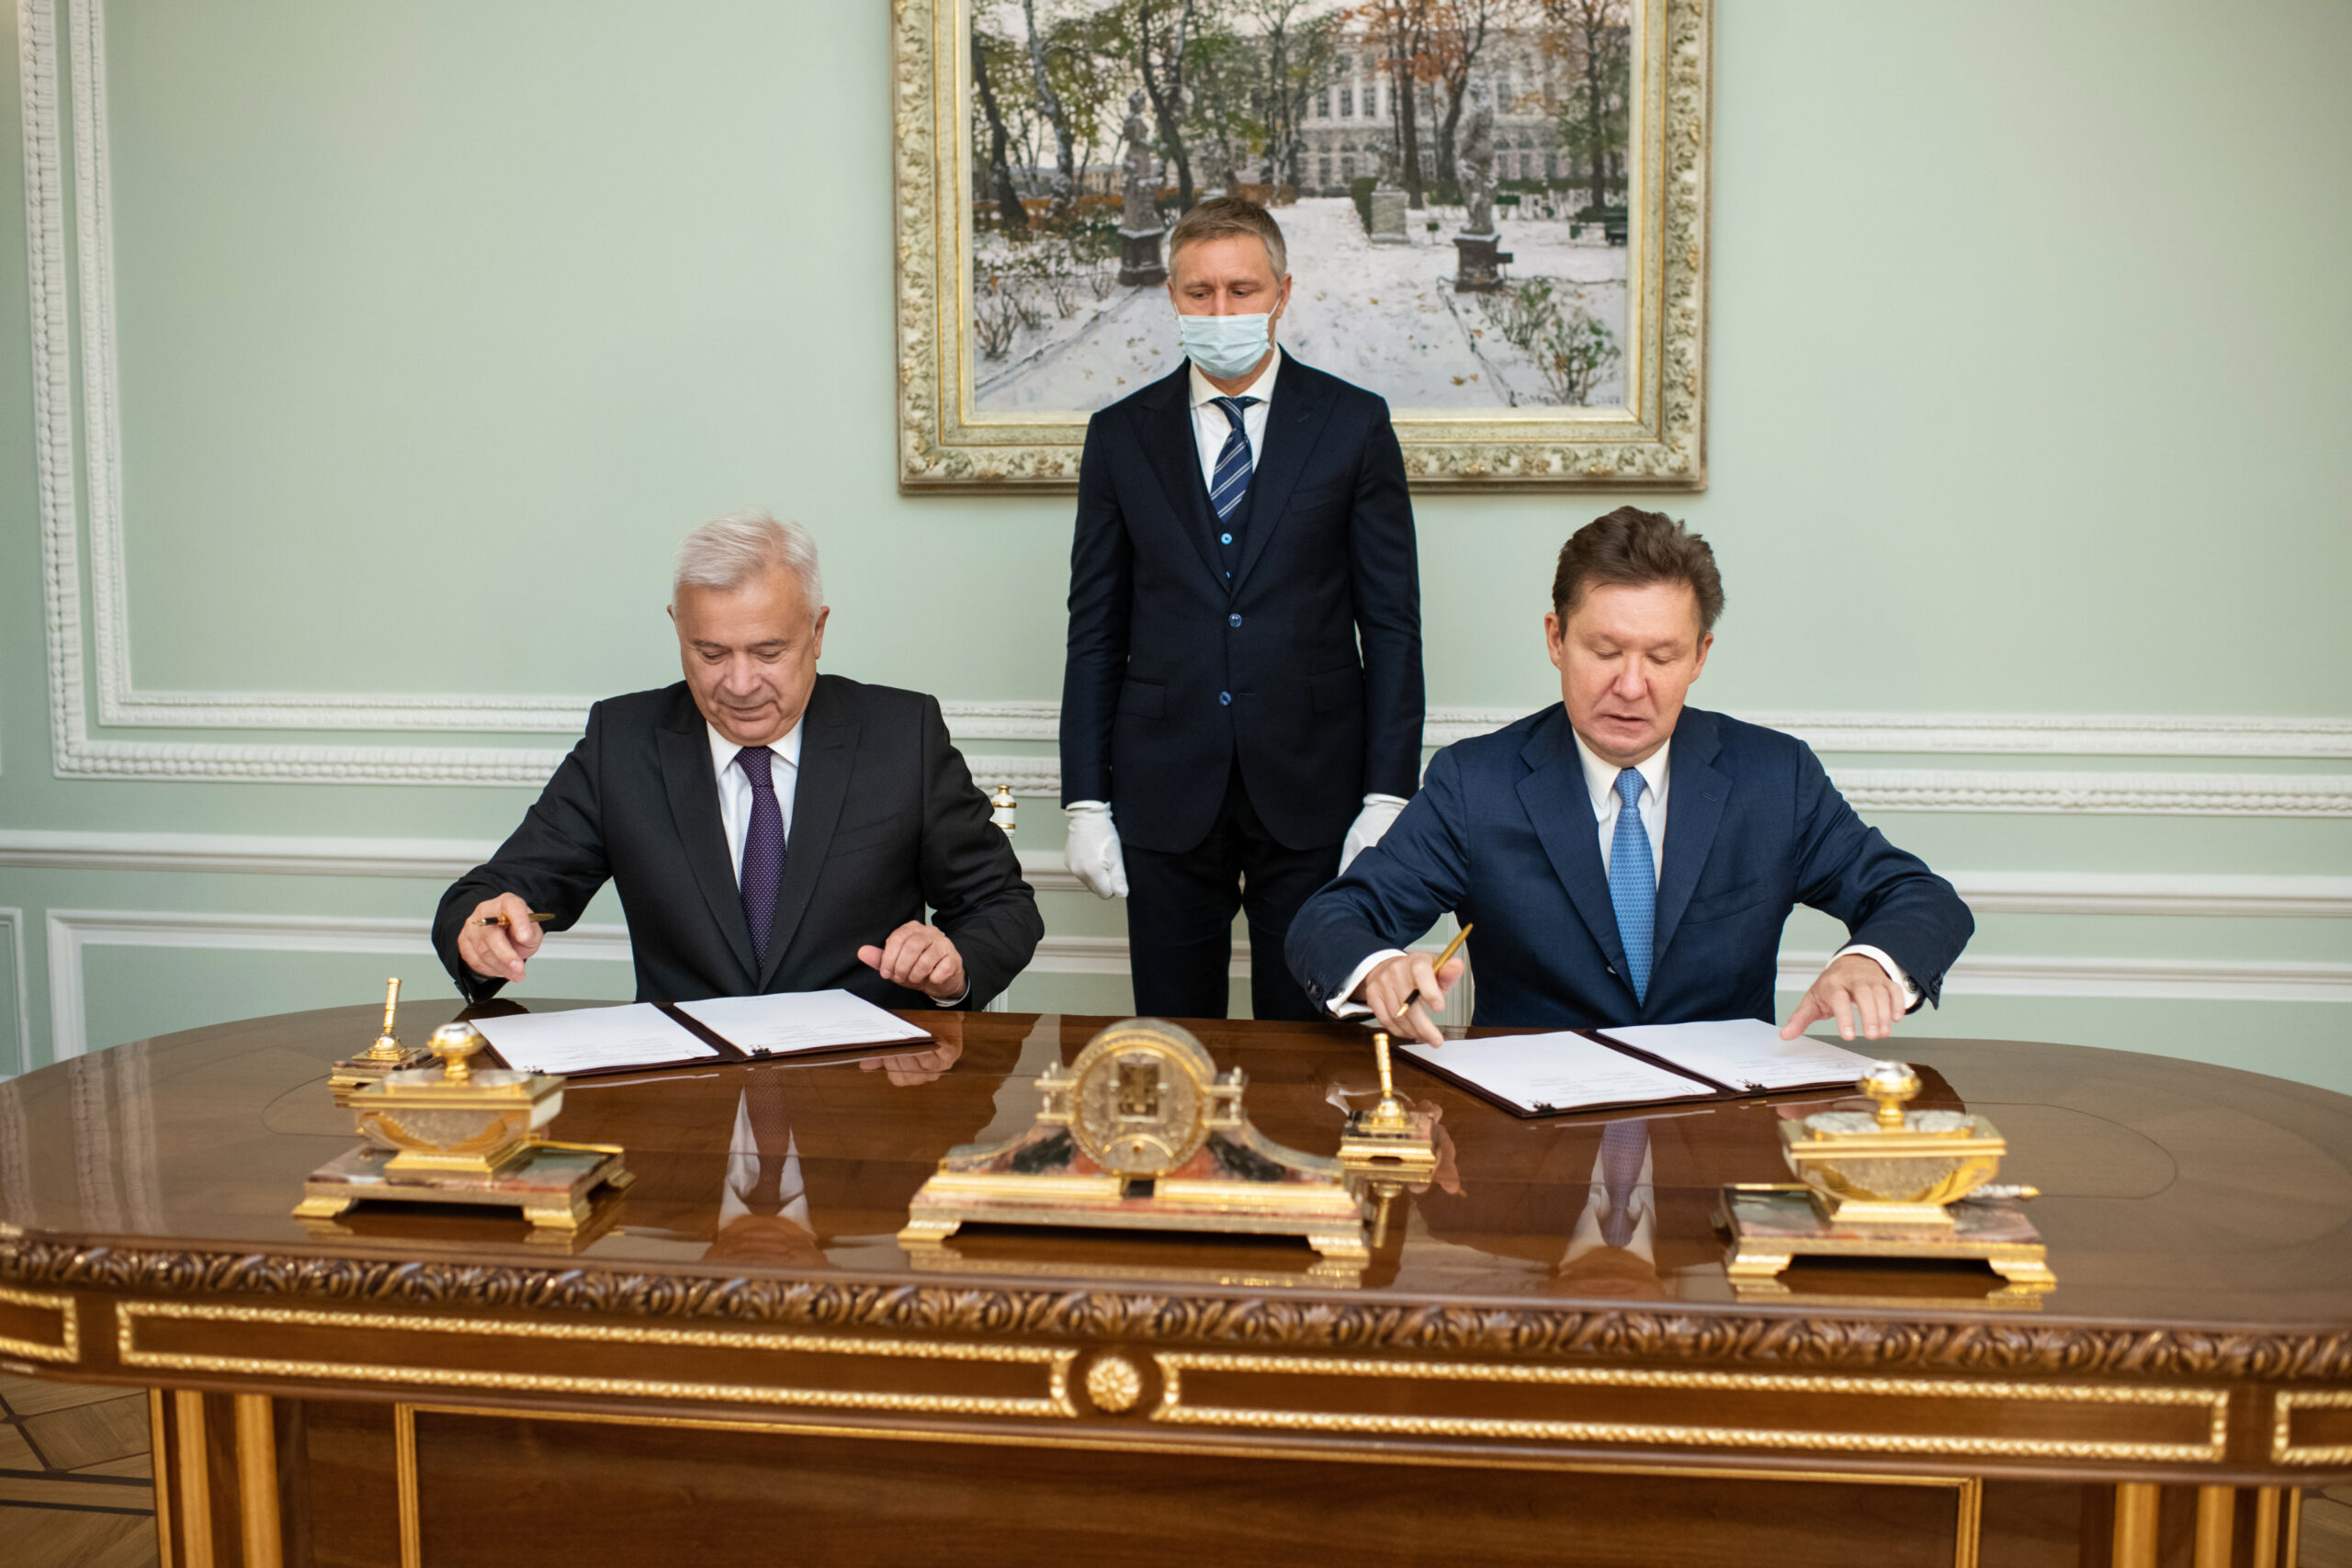 Gazprom and LUKOIL sign Master Agreement to develop two fields in Nenets Autonomous Area